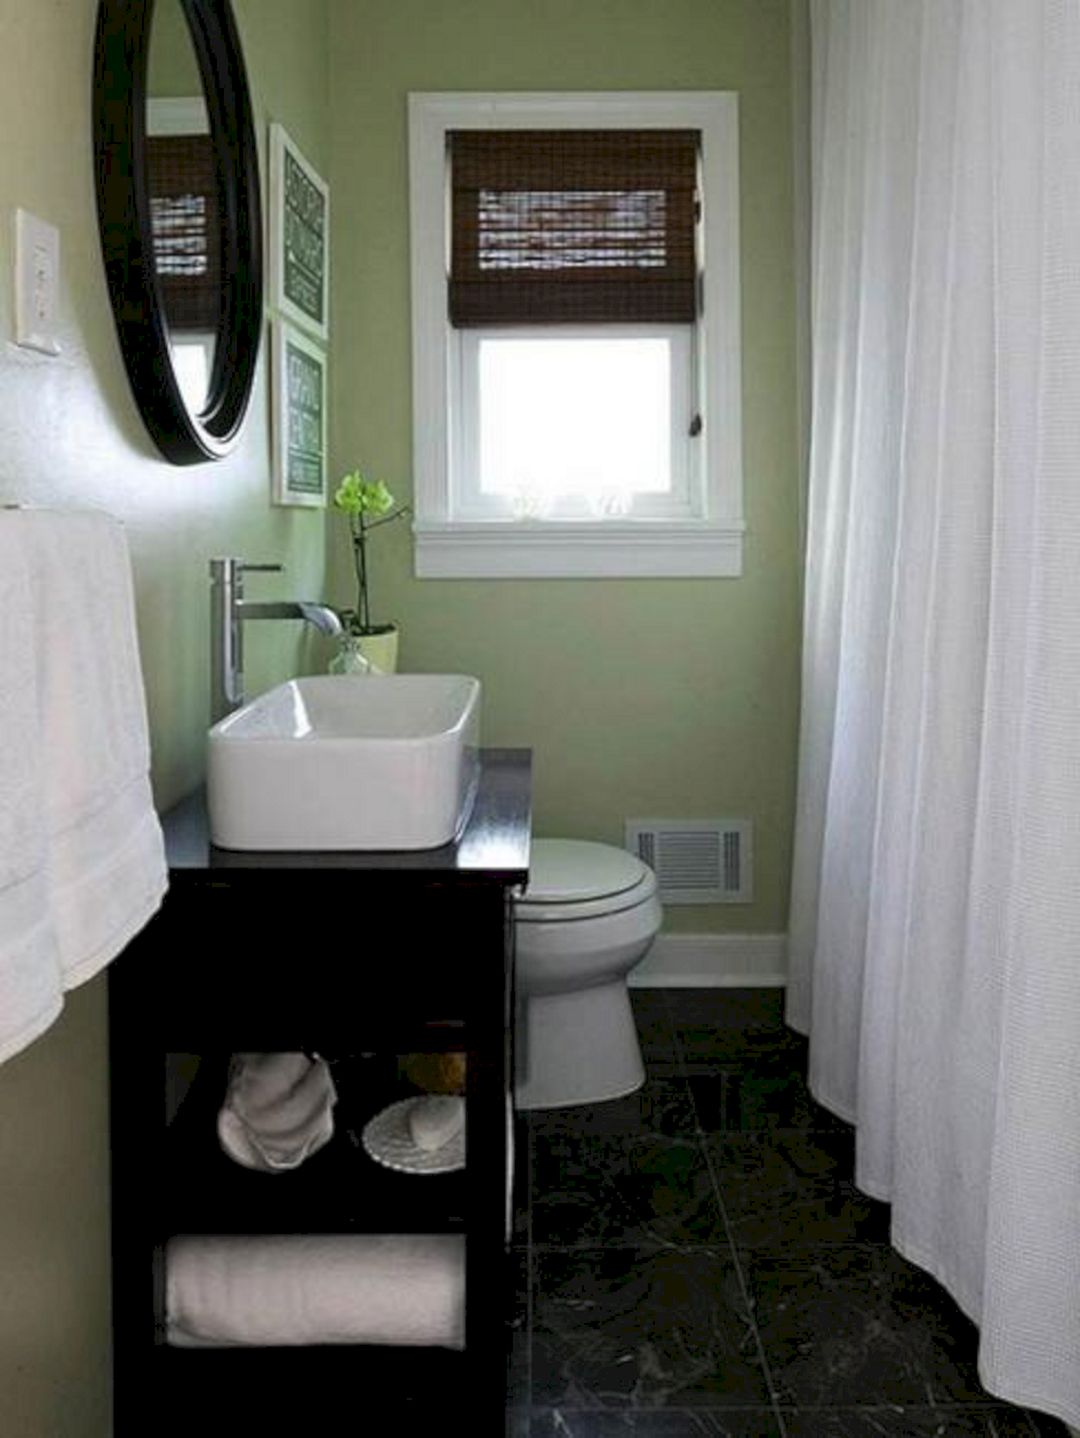  Small  Bathroom  Remodeling Ideas  Small  Bathroom  Remodeling 